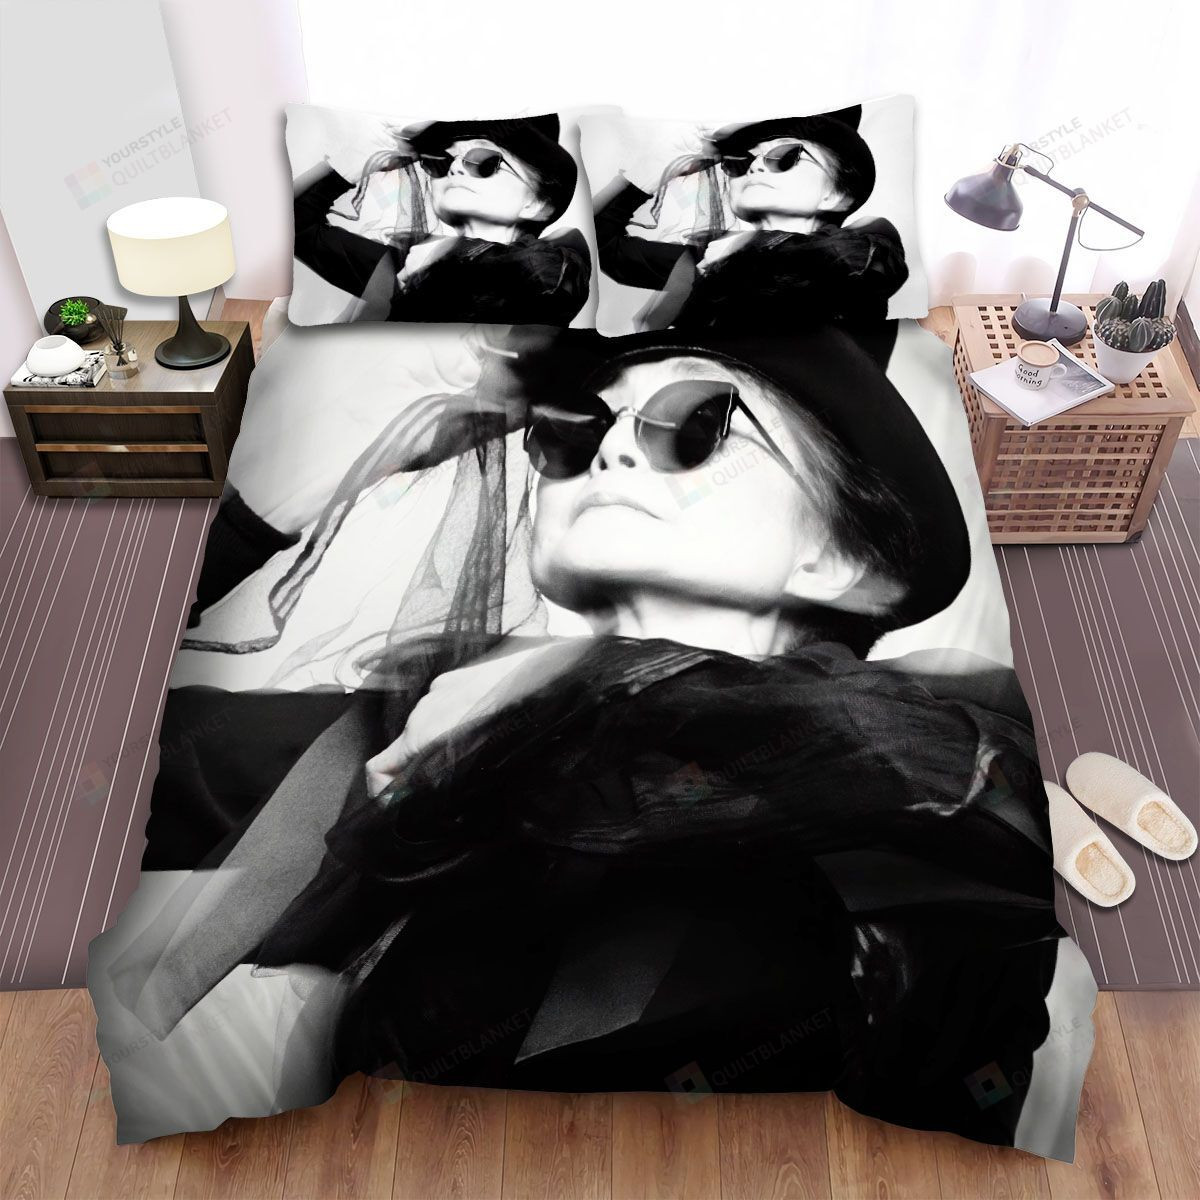 Yoko Ono Plastic Ono Band Bed Sheets Spread Comforter Duvet Cover Bedding Sets